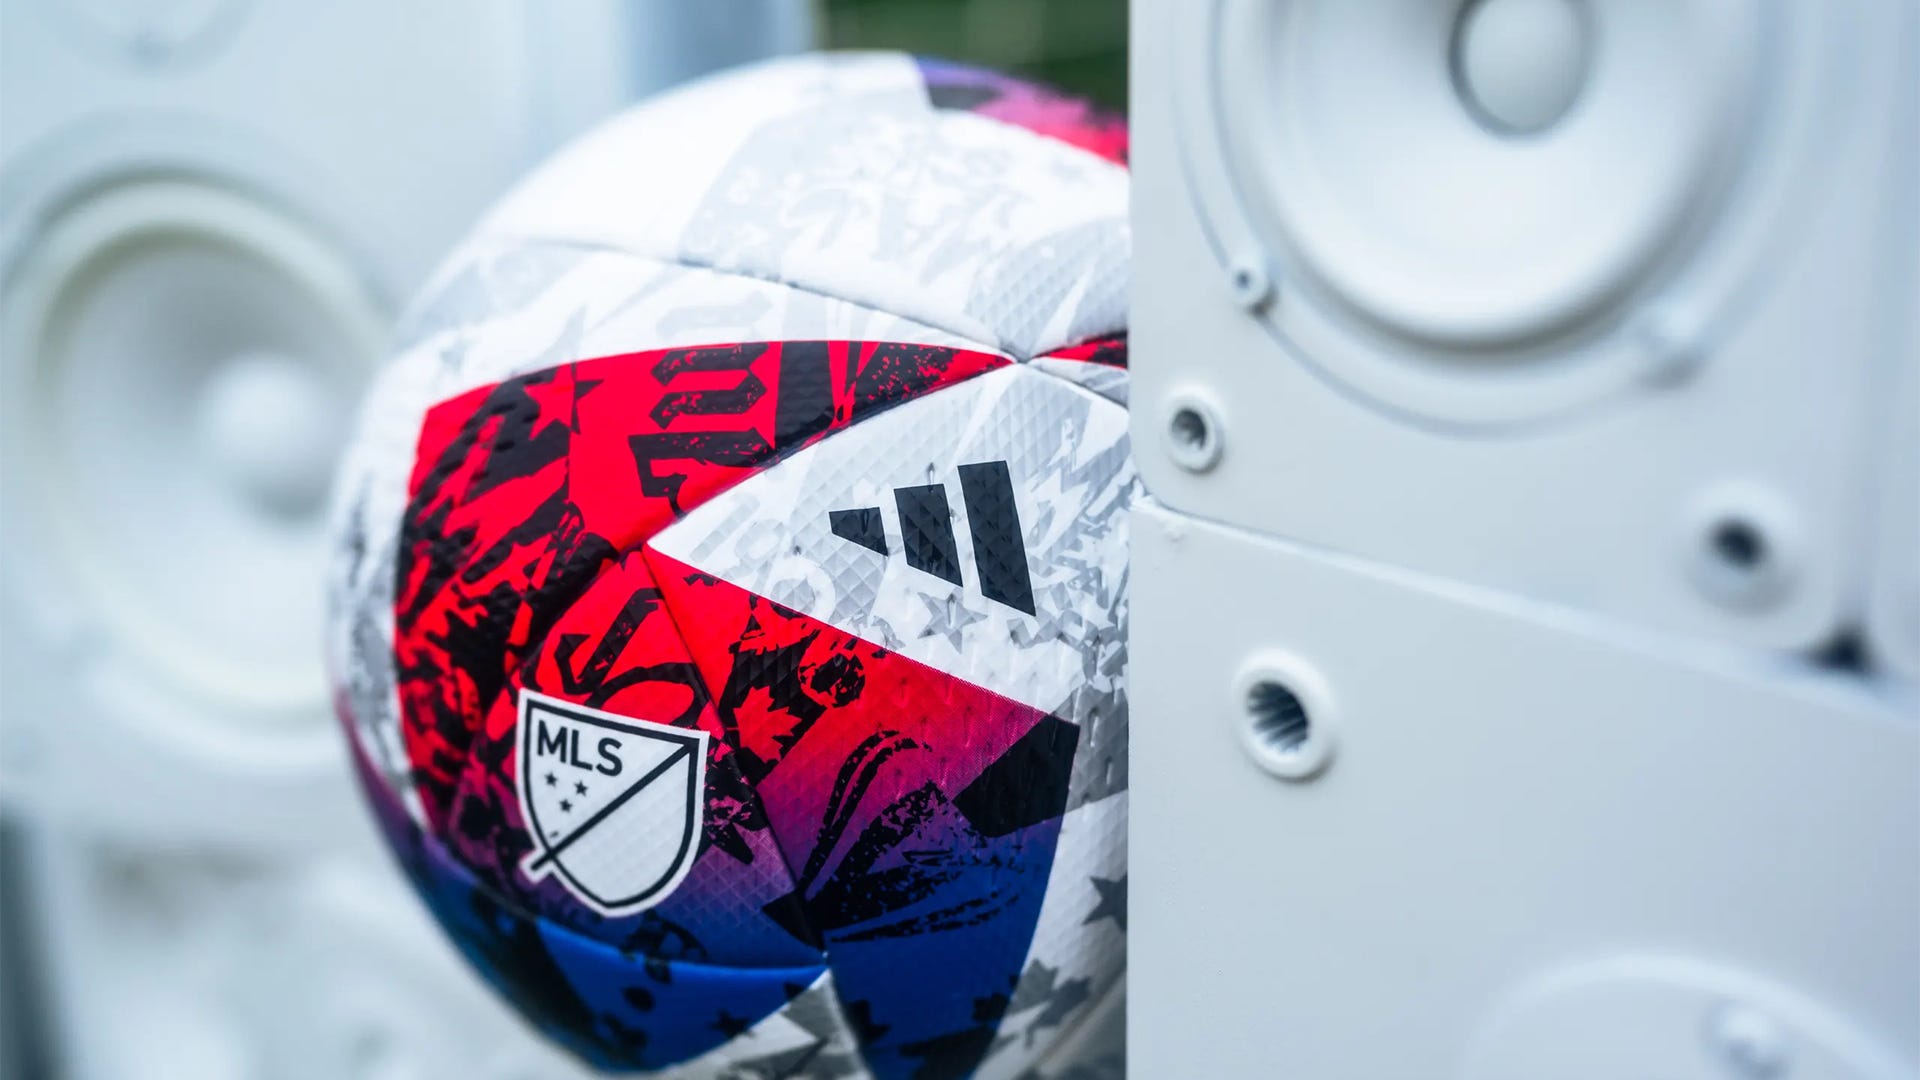 adidas unveil official 2023 MLS Pro Match Ball for the season